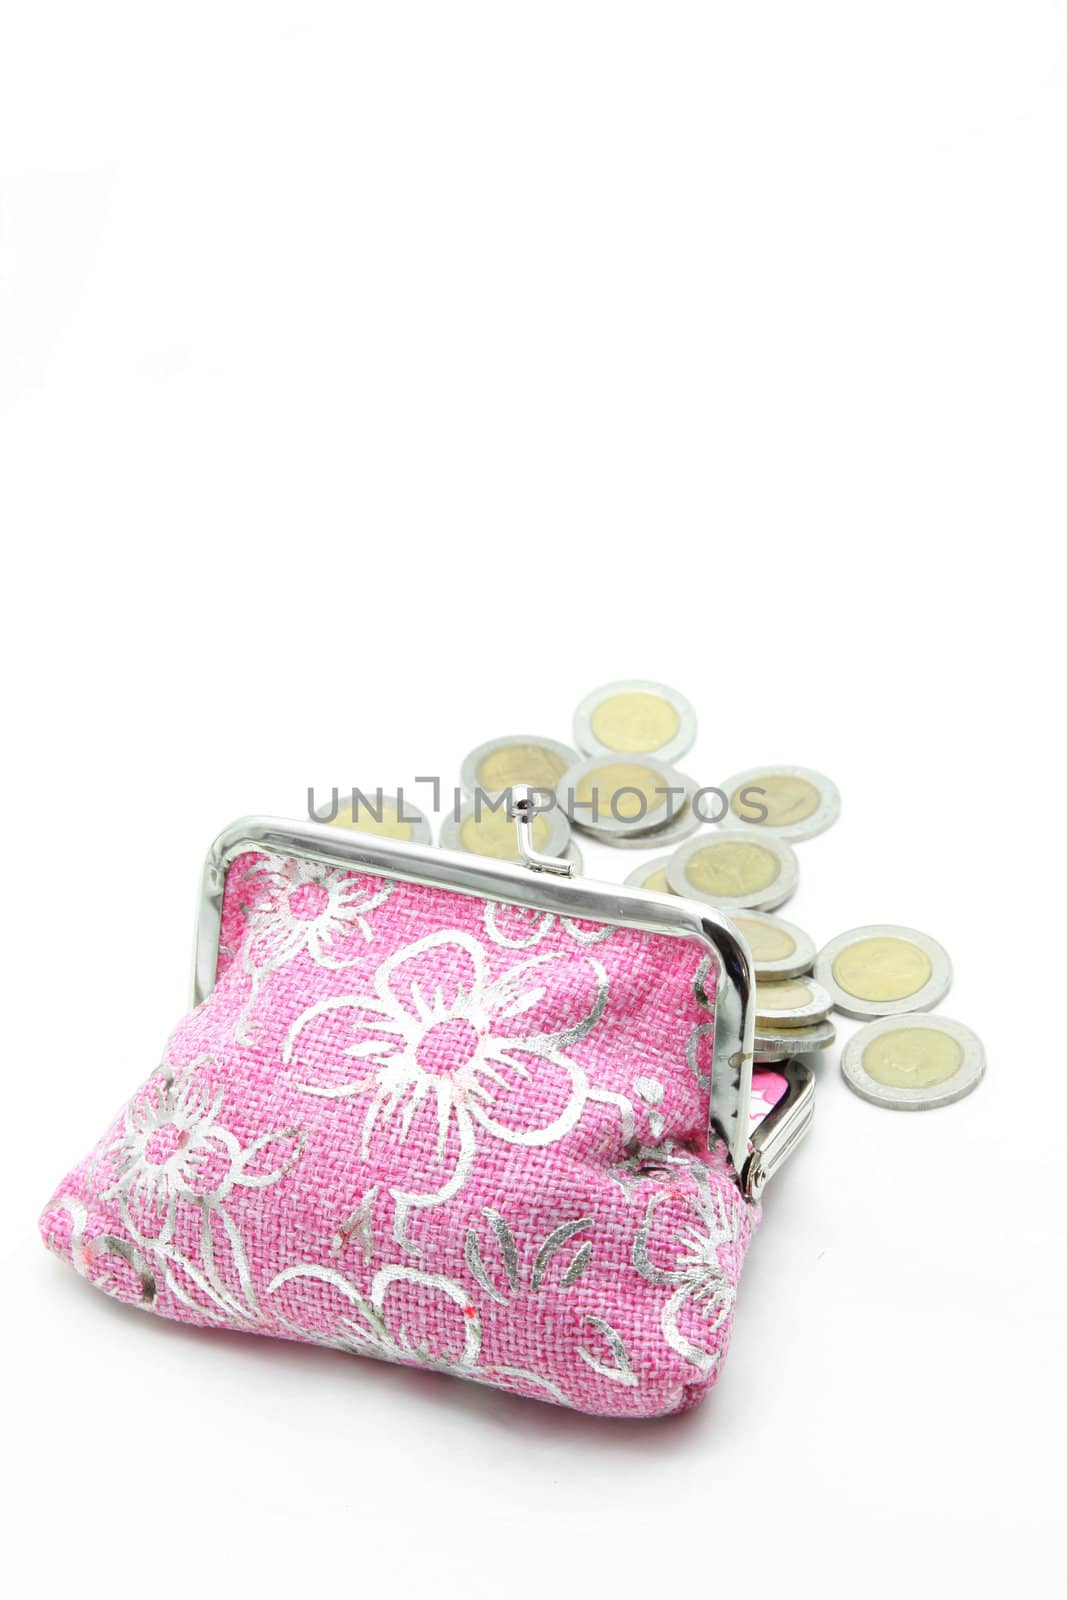 coins spilling out from flower pink money bag or purse isolated on white